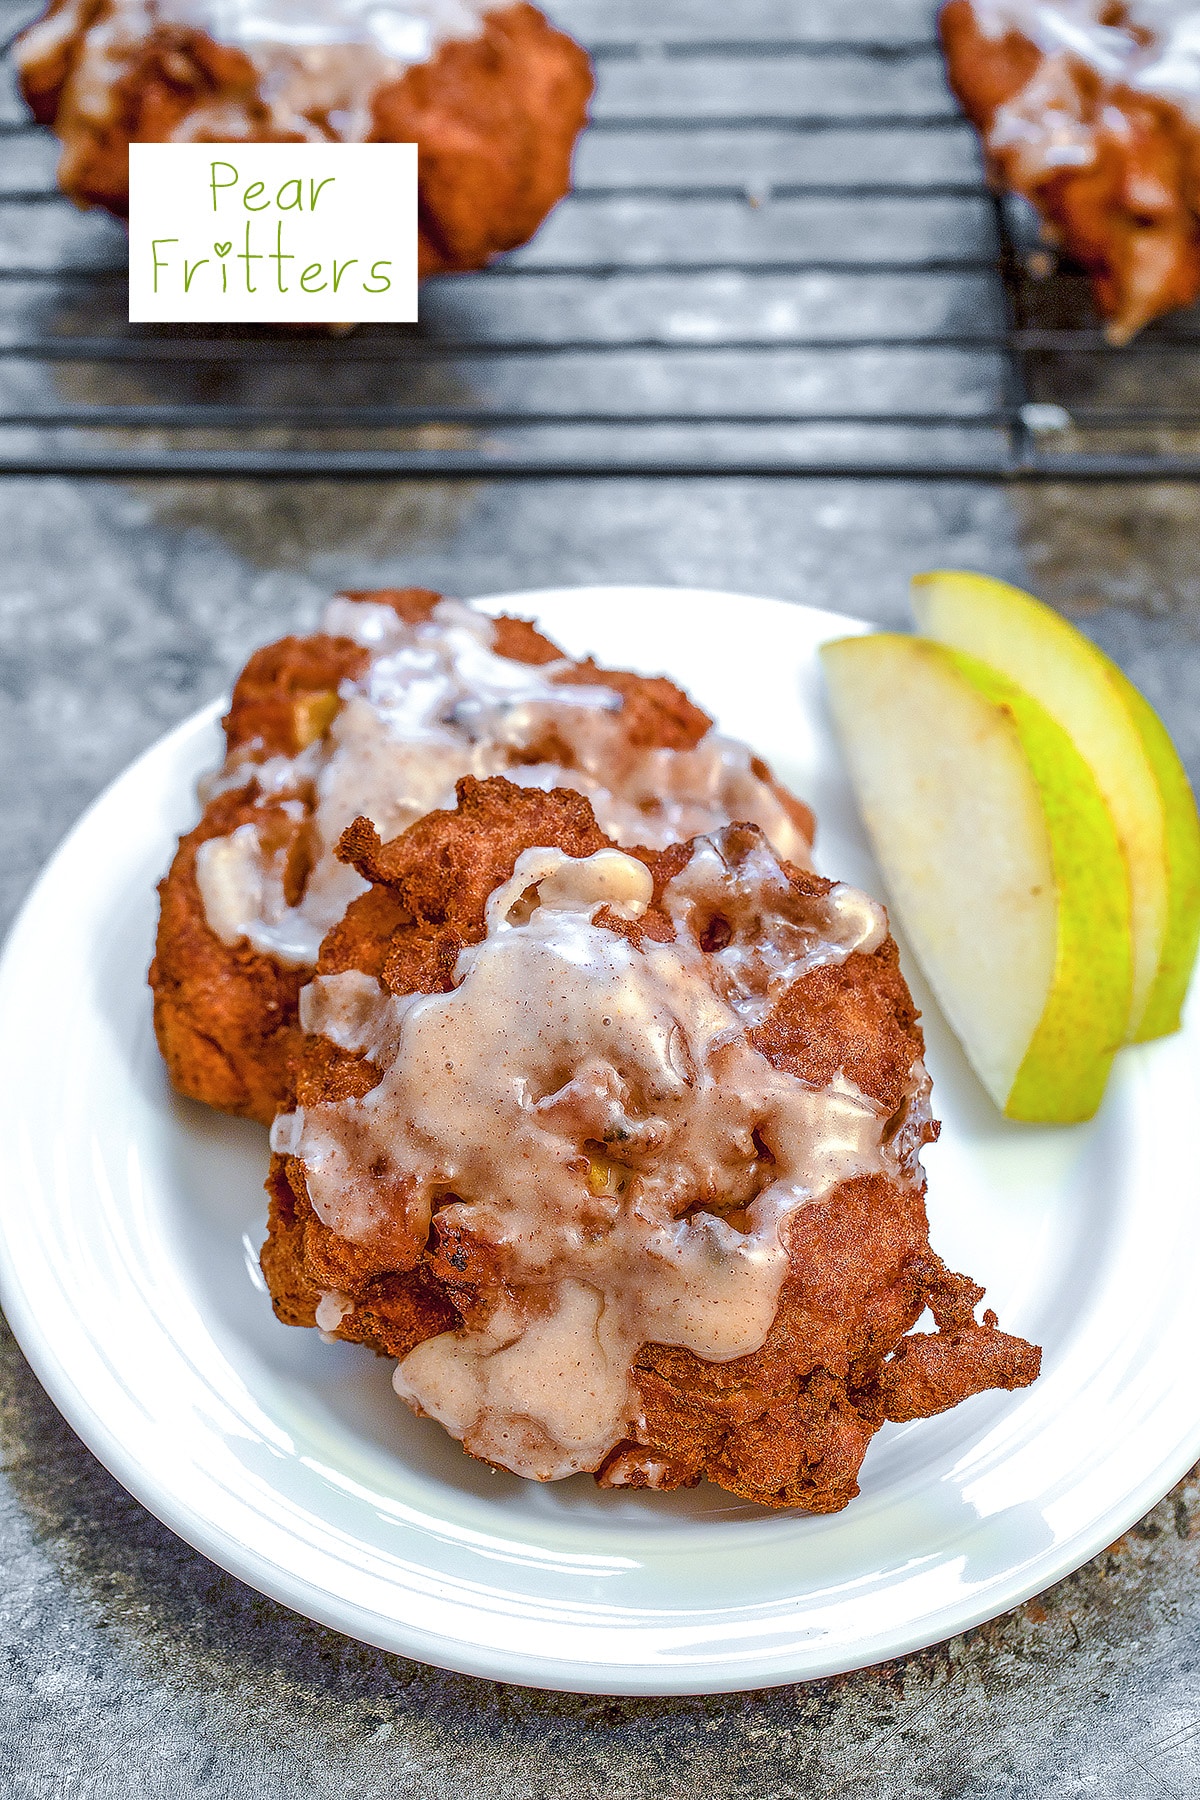 Overhead view of a pear fritter on a white plate with sliced pears, a baking rack with more pear fritters in the background, and recipe title at top.